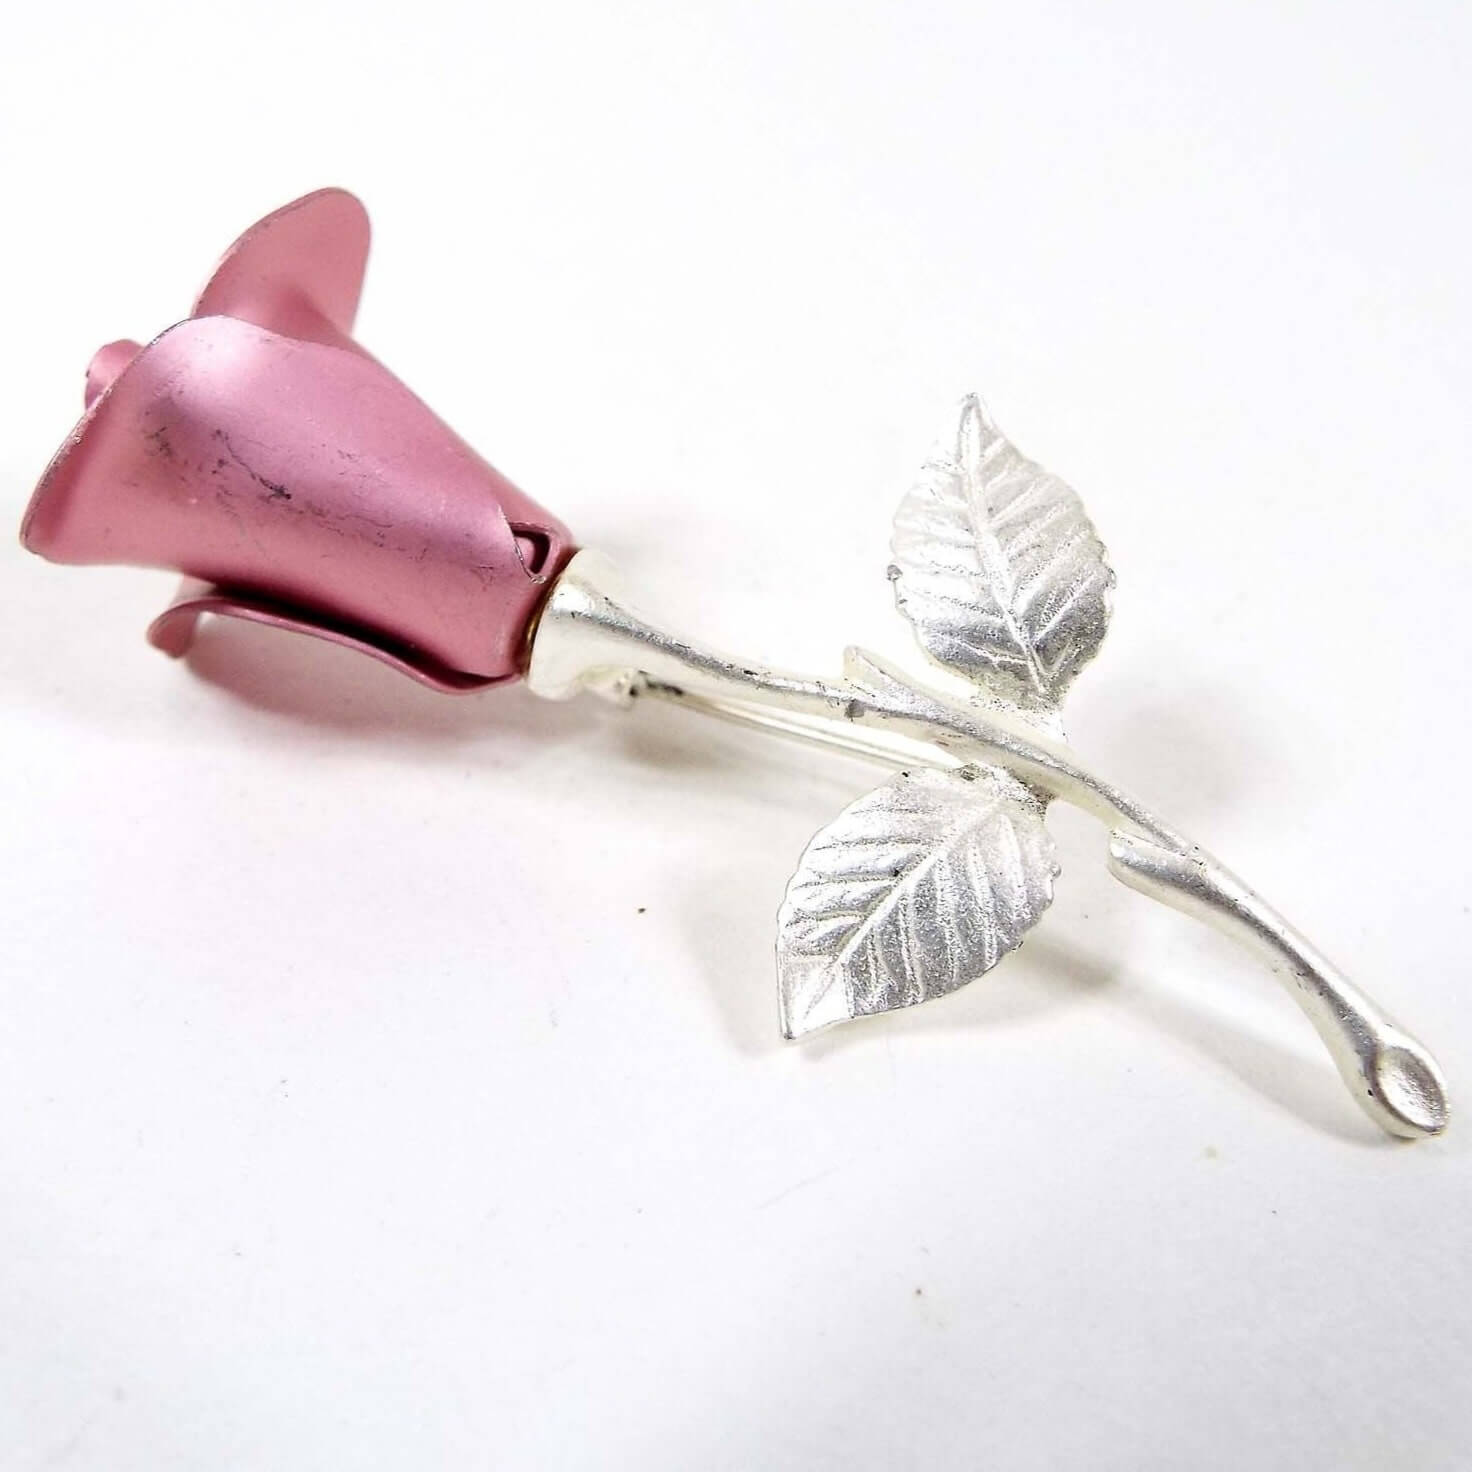 Front view of the retro 1990's Avon vintage rose flower brooch. It has a single rose design. The petals are pink painted aluminum. The stem, leaves, and pin are silver tone in color. 